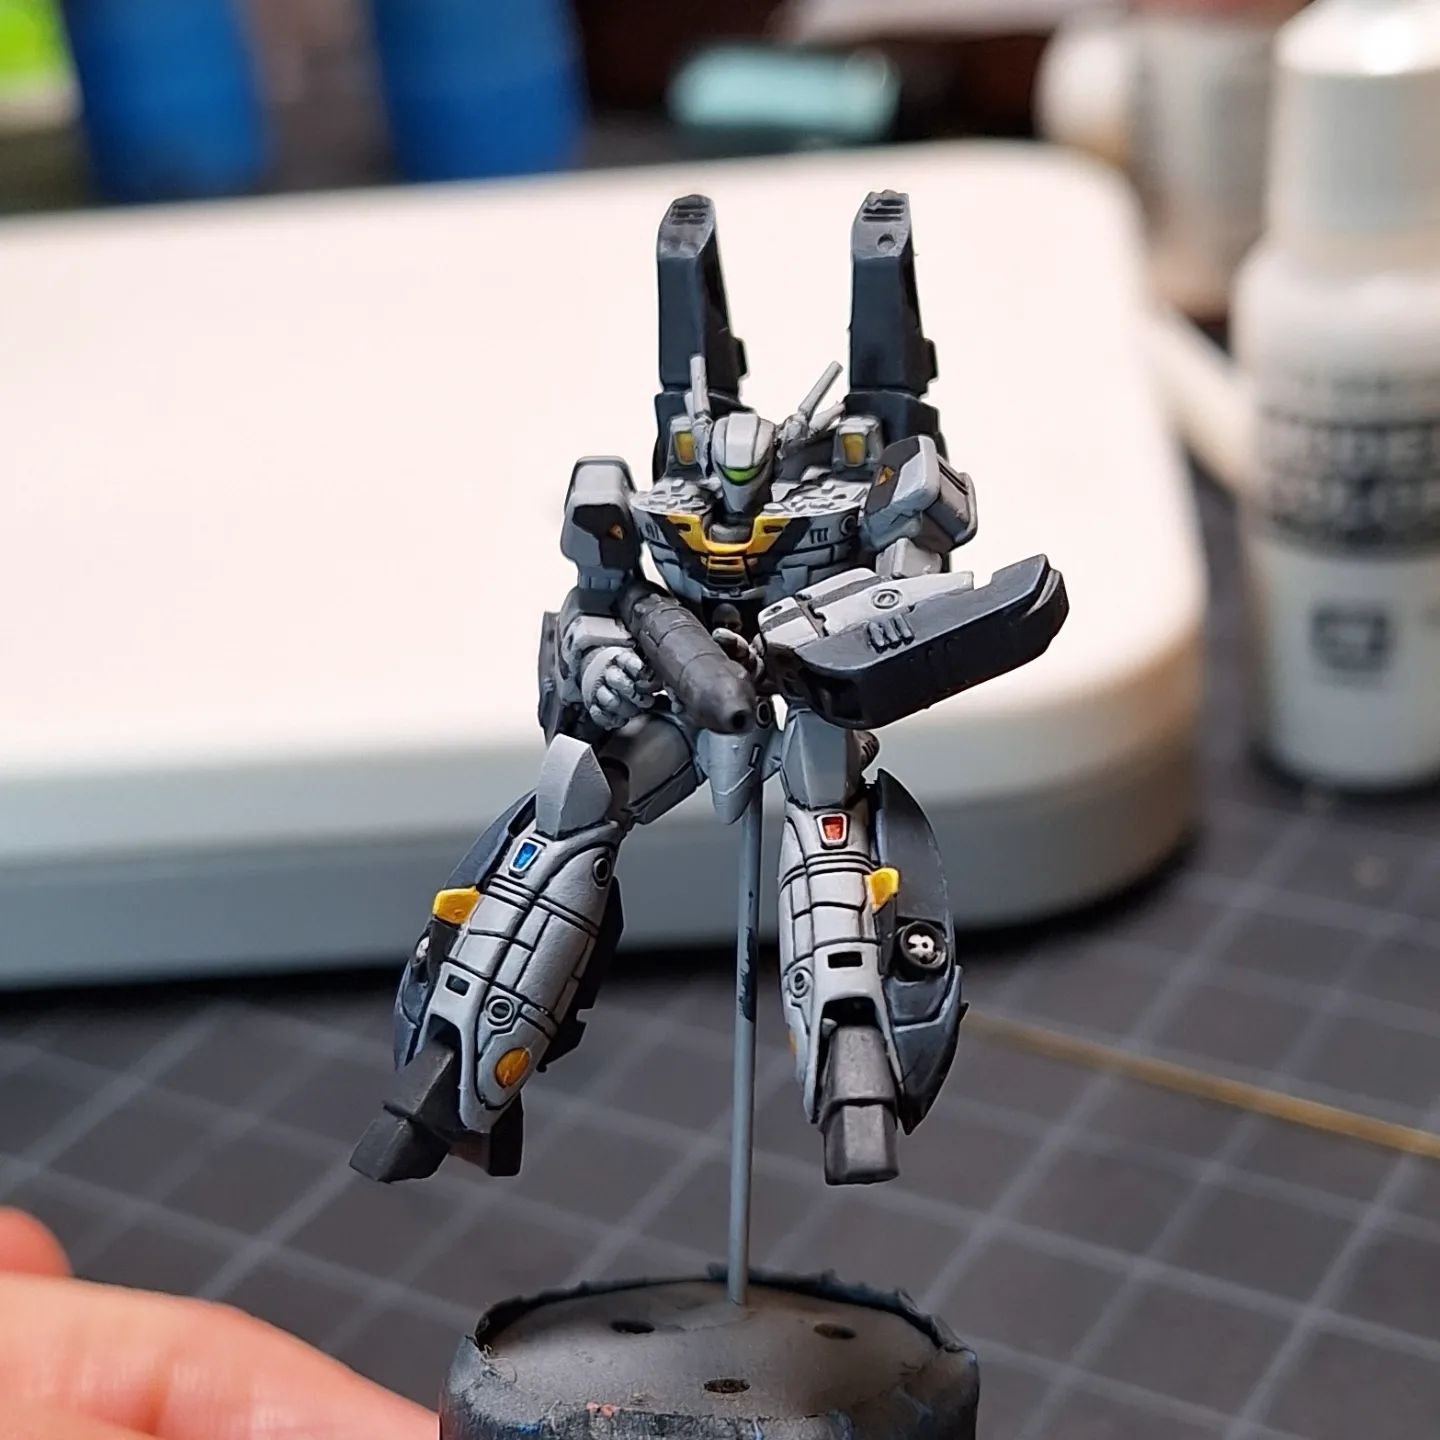 My dads birthday would have been today, so I just mindlessly painted this VF-1S from Macross/Robotech. I Still need to make a base but I got up to varnish it and I could barely walk... #macross #robotech #minitech #kids logic #miniature #miniatures #mini #miniaturepainting #Valkyrie #vf1s #vf-1s